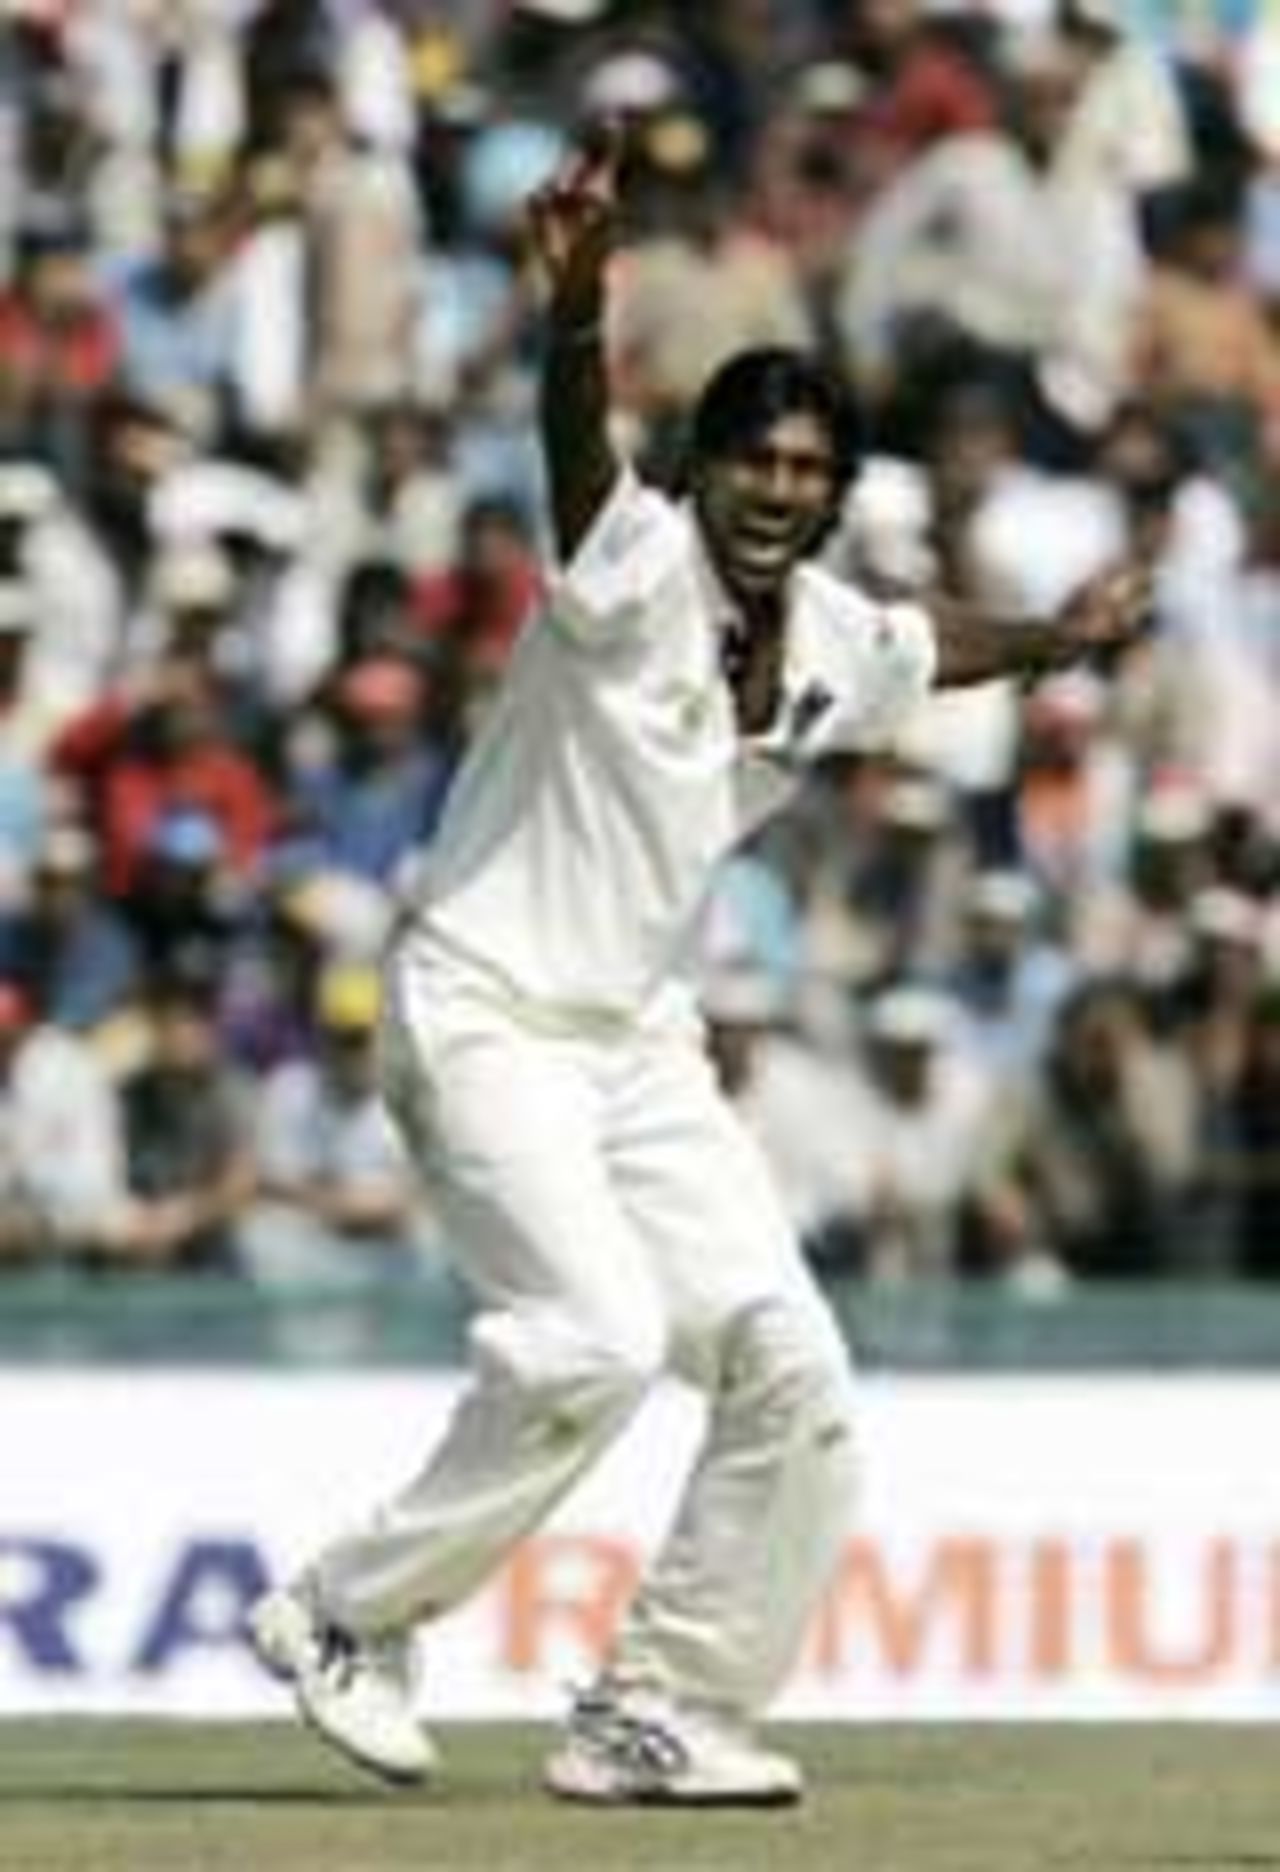 Lakshmipathy Balaji appeals on the way to his first Test five-for, India v Pakistan, 1st Test, Mohali, Day 1, March 8, 2005